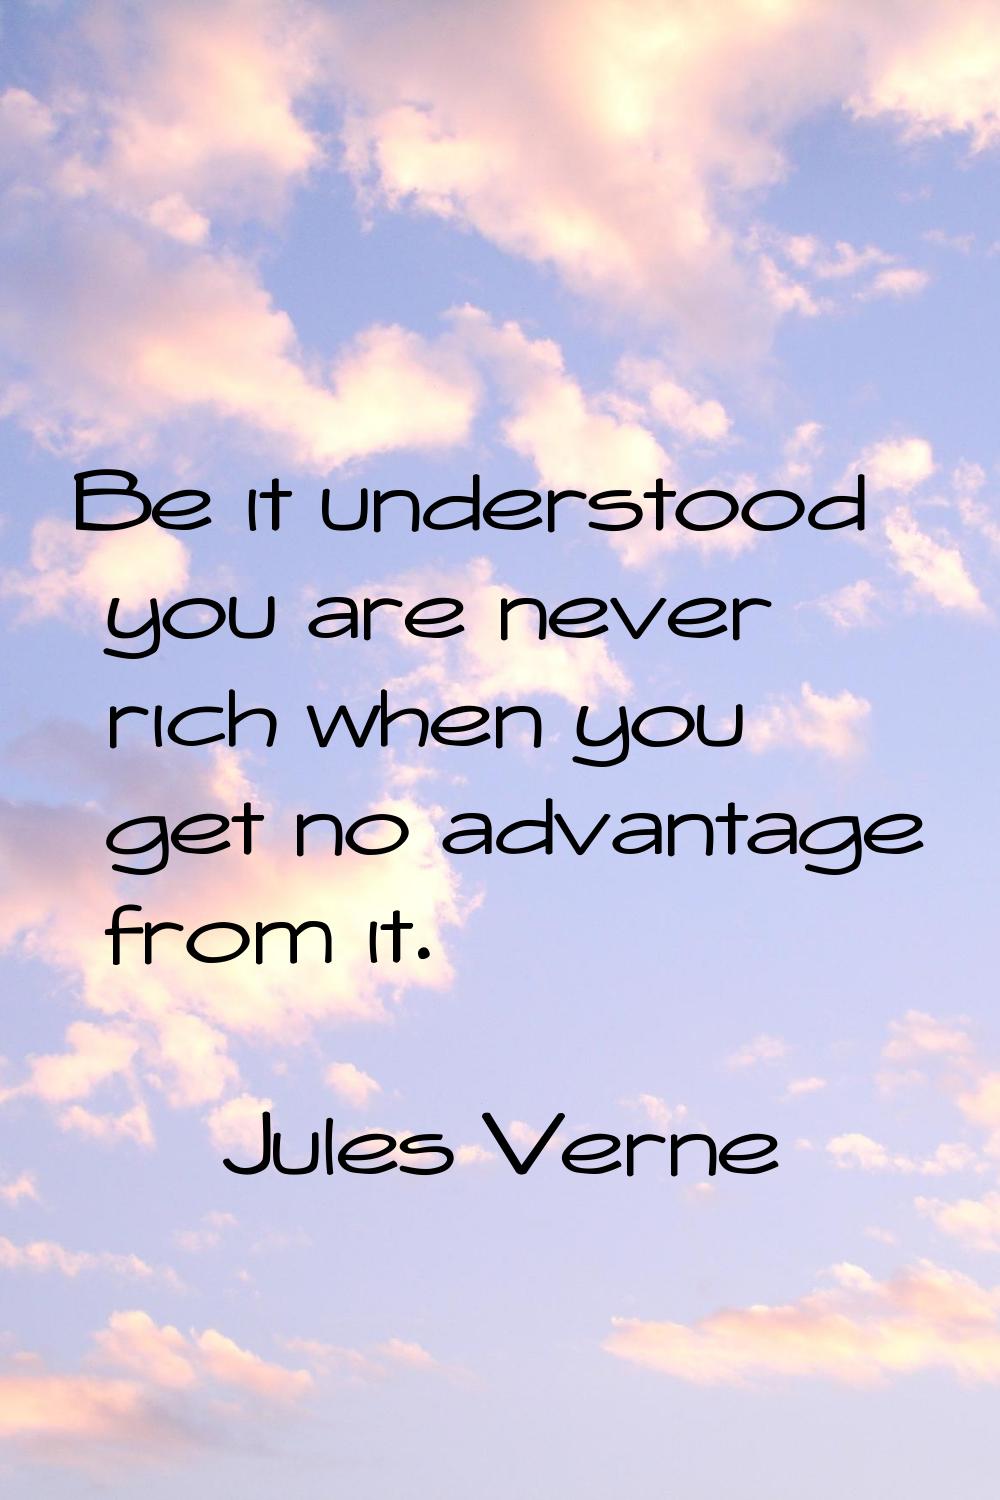 Be it understood you are never rich when you get no advantage from it.